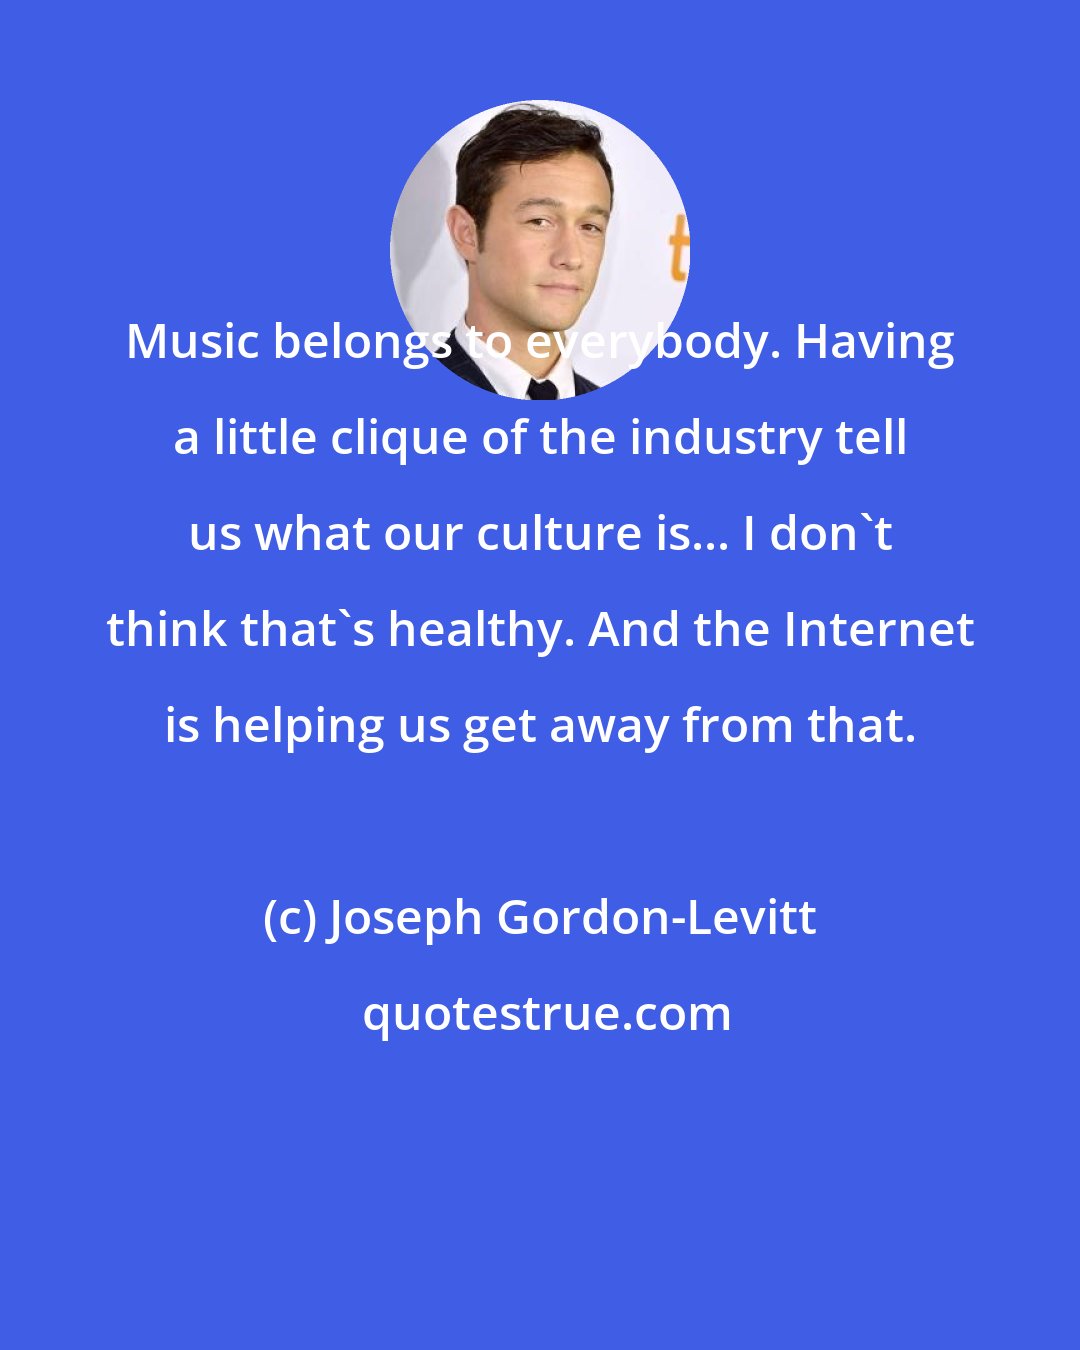 Joseph Gordon-Levitt: Music belongs to everybody. Having a little clique of the industry tell us what our culture is... I don't think that's healthy. And the Internet is helping us get away from that.